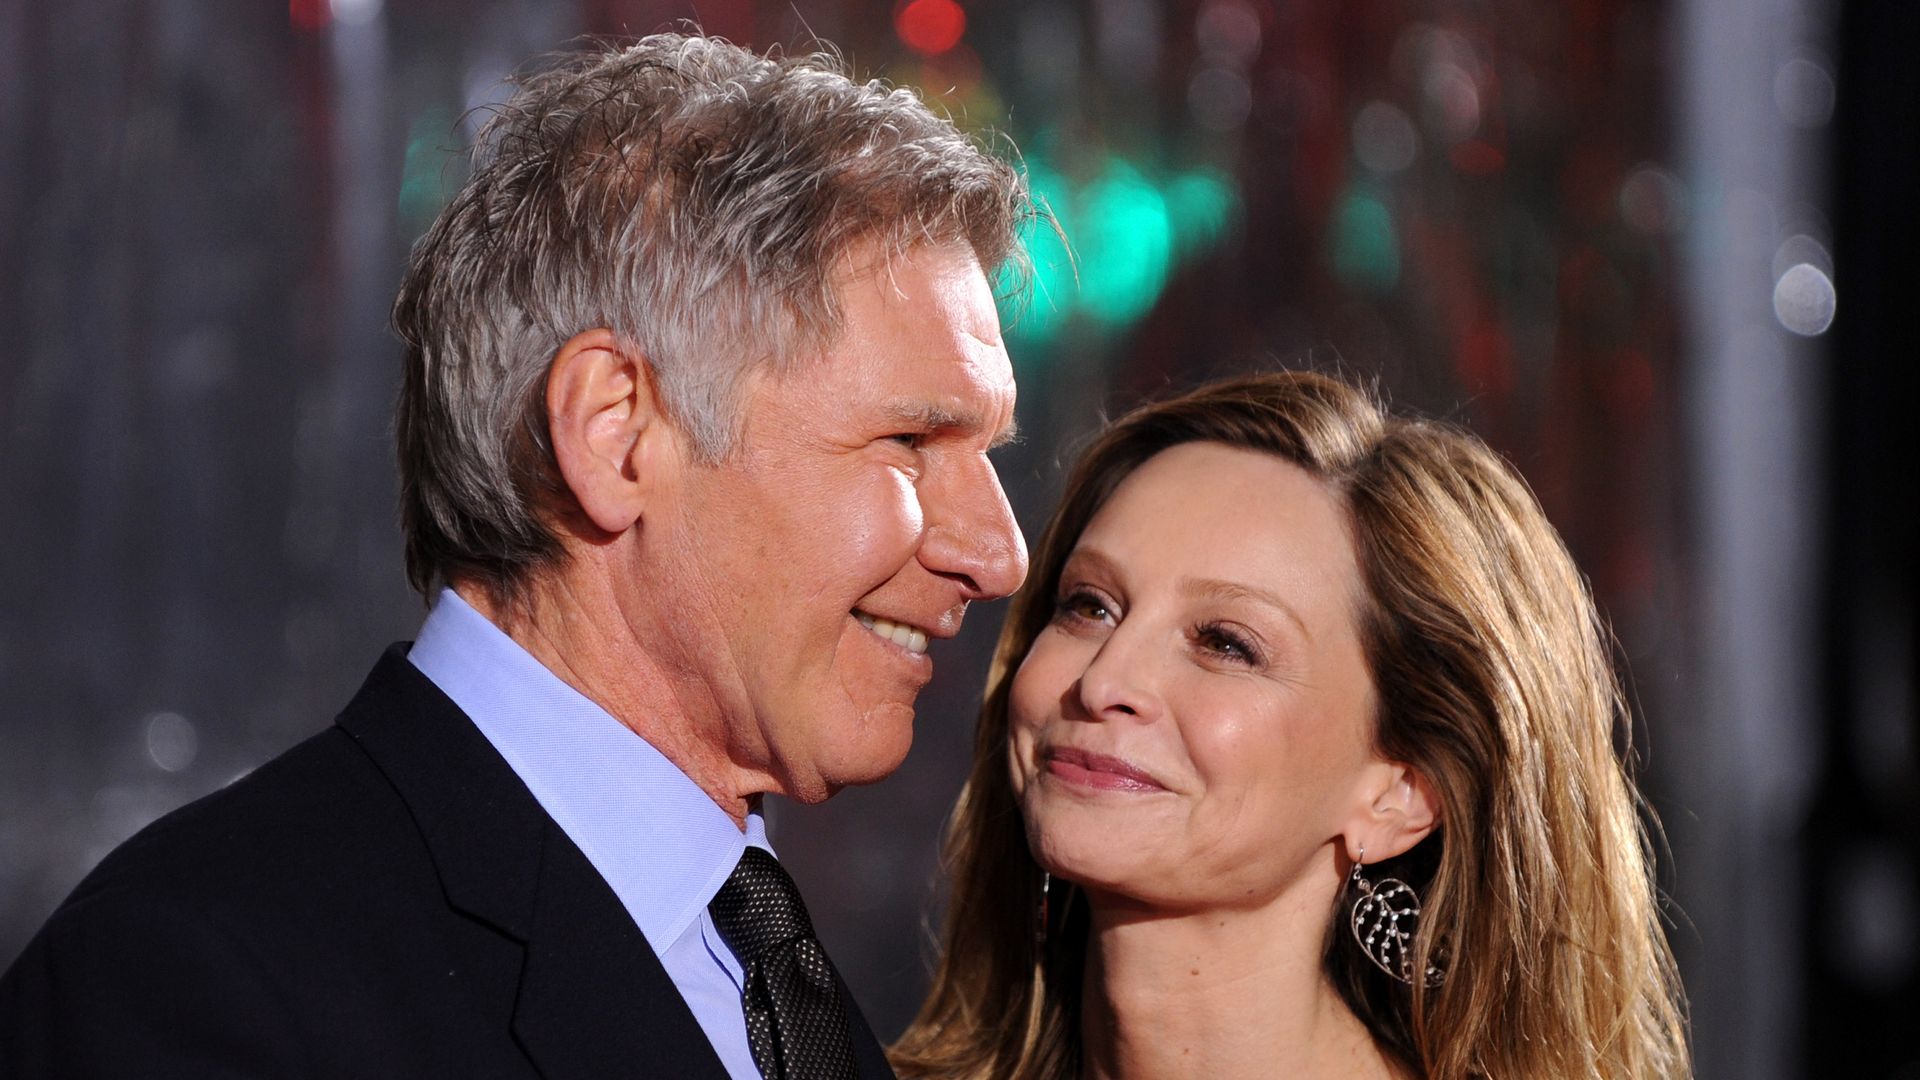 Harrison Ford and Calista Flockhart arrive at the premiere of CBS Films' "Extraordinary Measures"